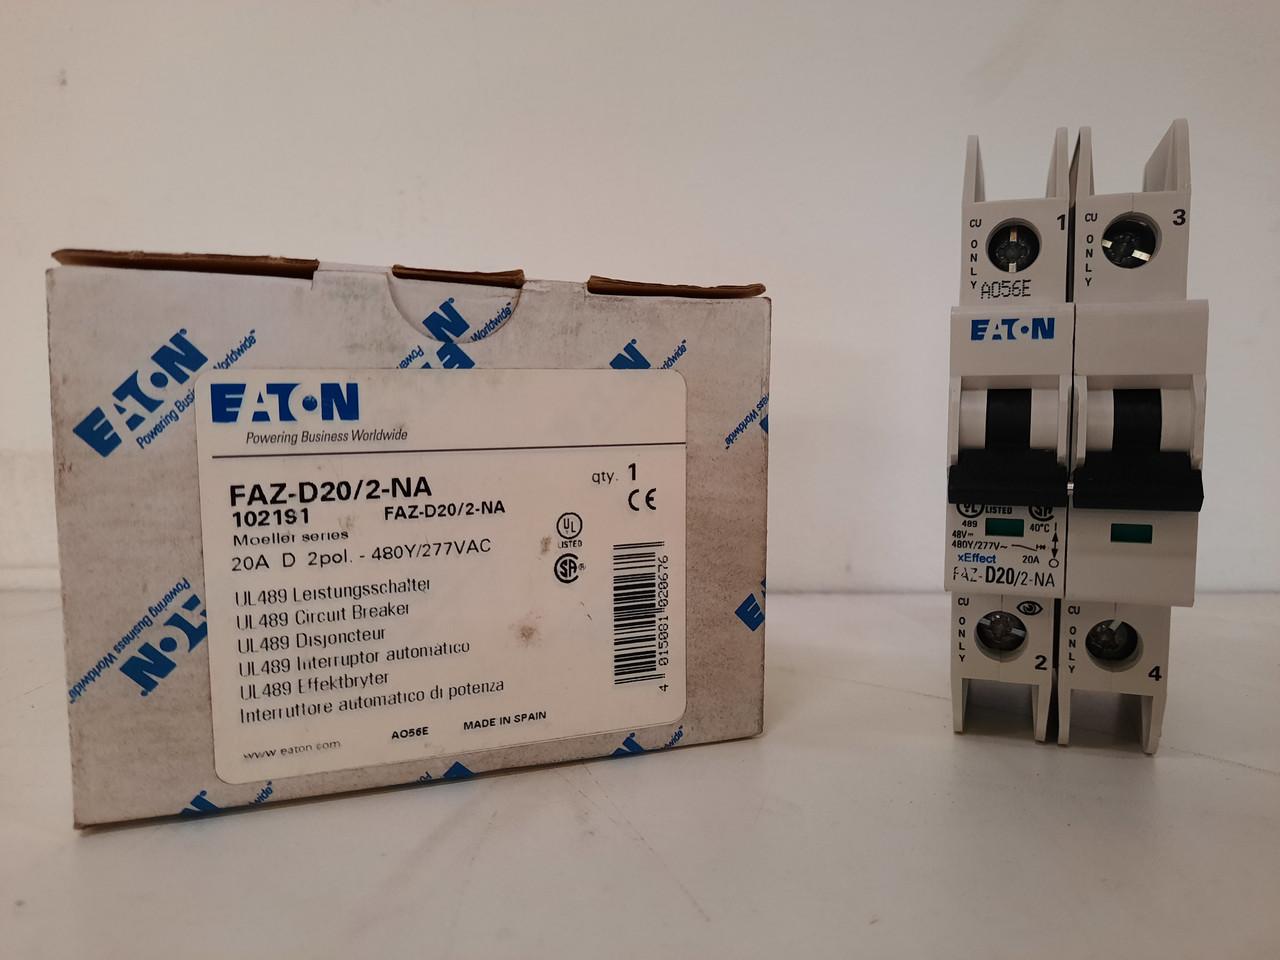 Eaton FAZ-D20/2-NA 277/480 VAC, 96 VDC, 20 A, 10 kA, 10 to 20 x Rated Current, 2-Pole, Screw Terminal, DIN Rail Mount, Current Limiting, Thermal Magnetic